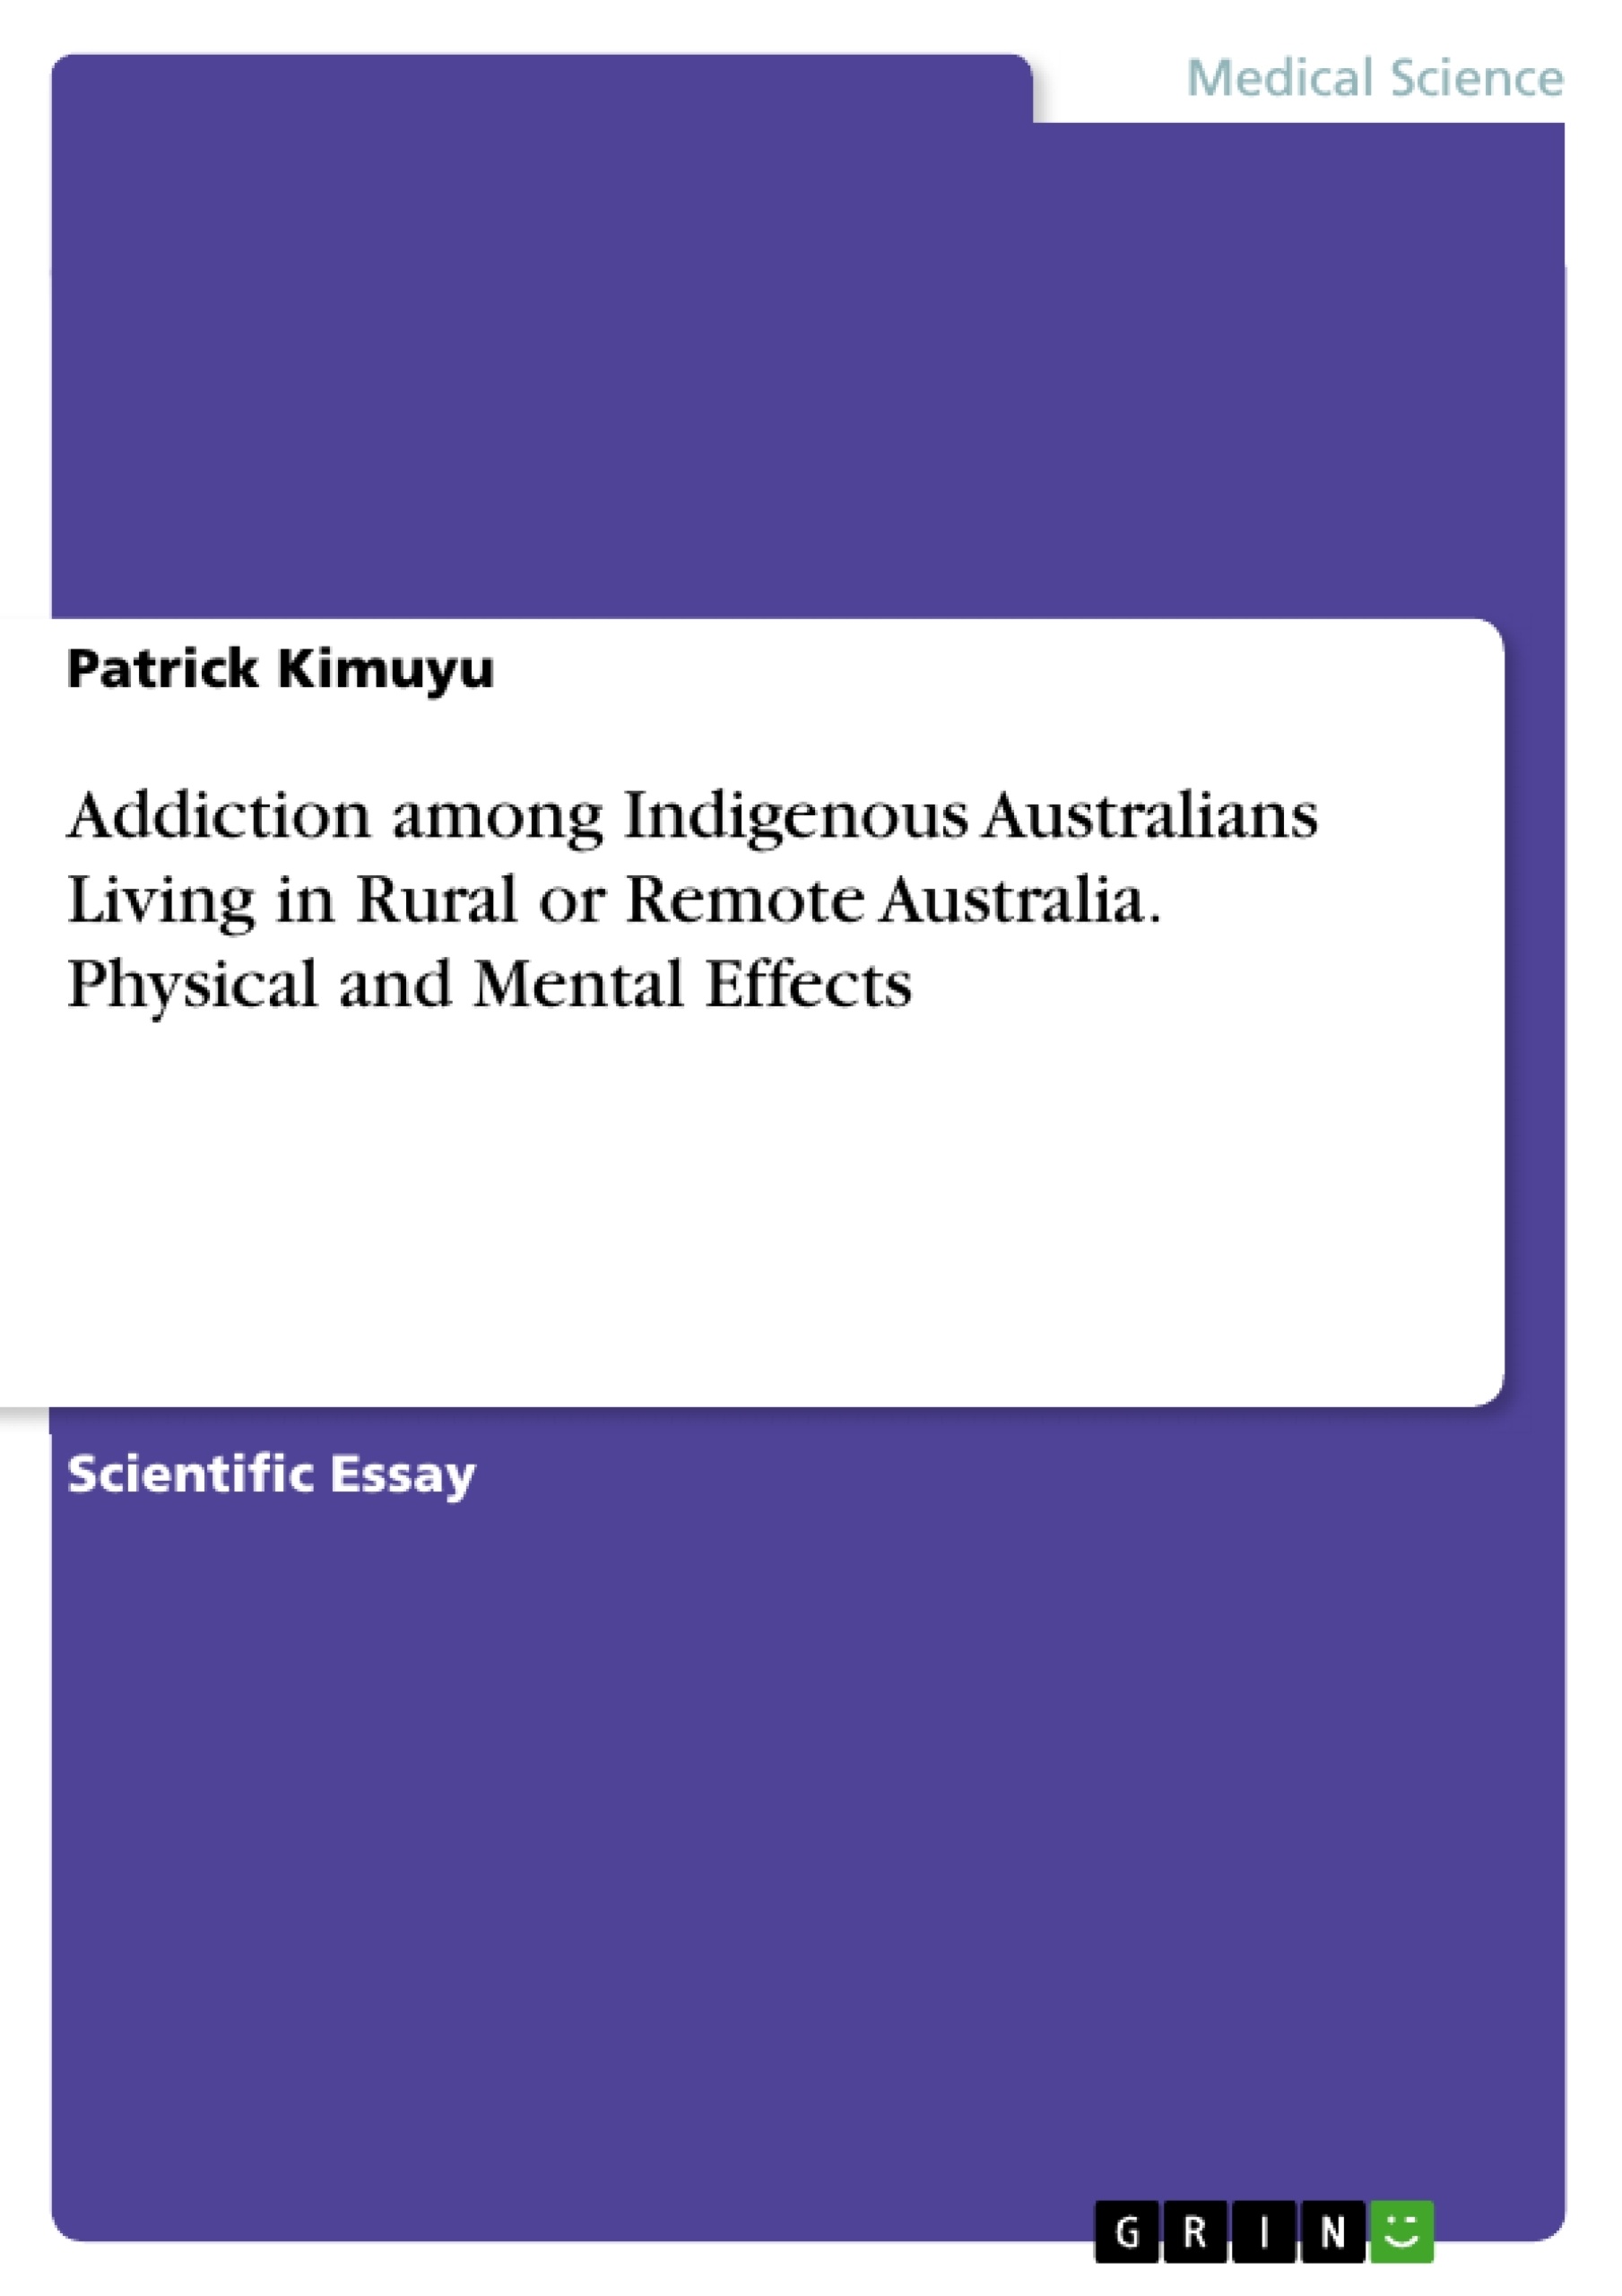 Title: Addiction among Indigenous Australians Living in Rural or Remote Australia. Physical and Mental Effects